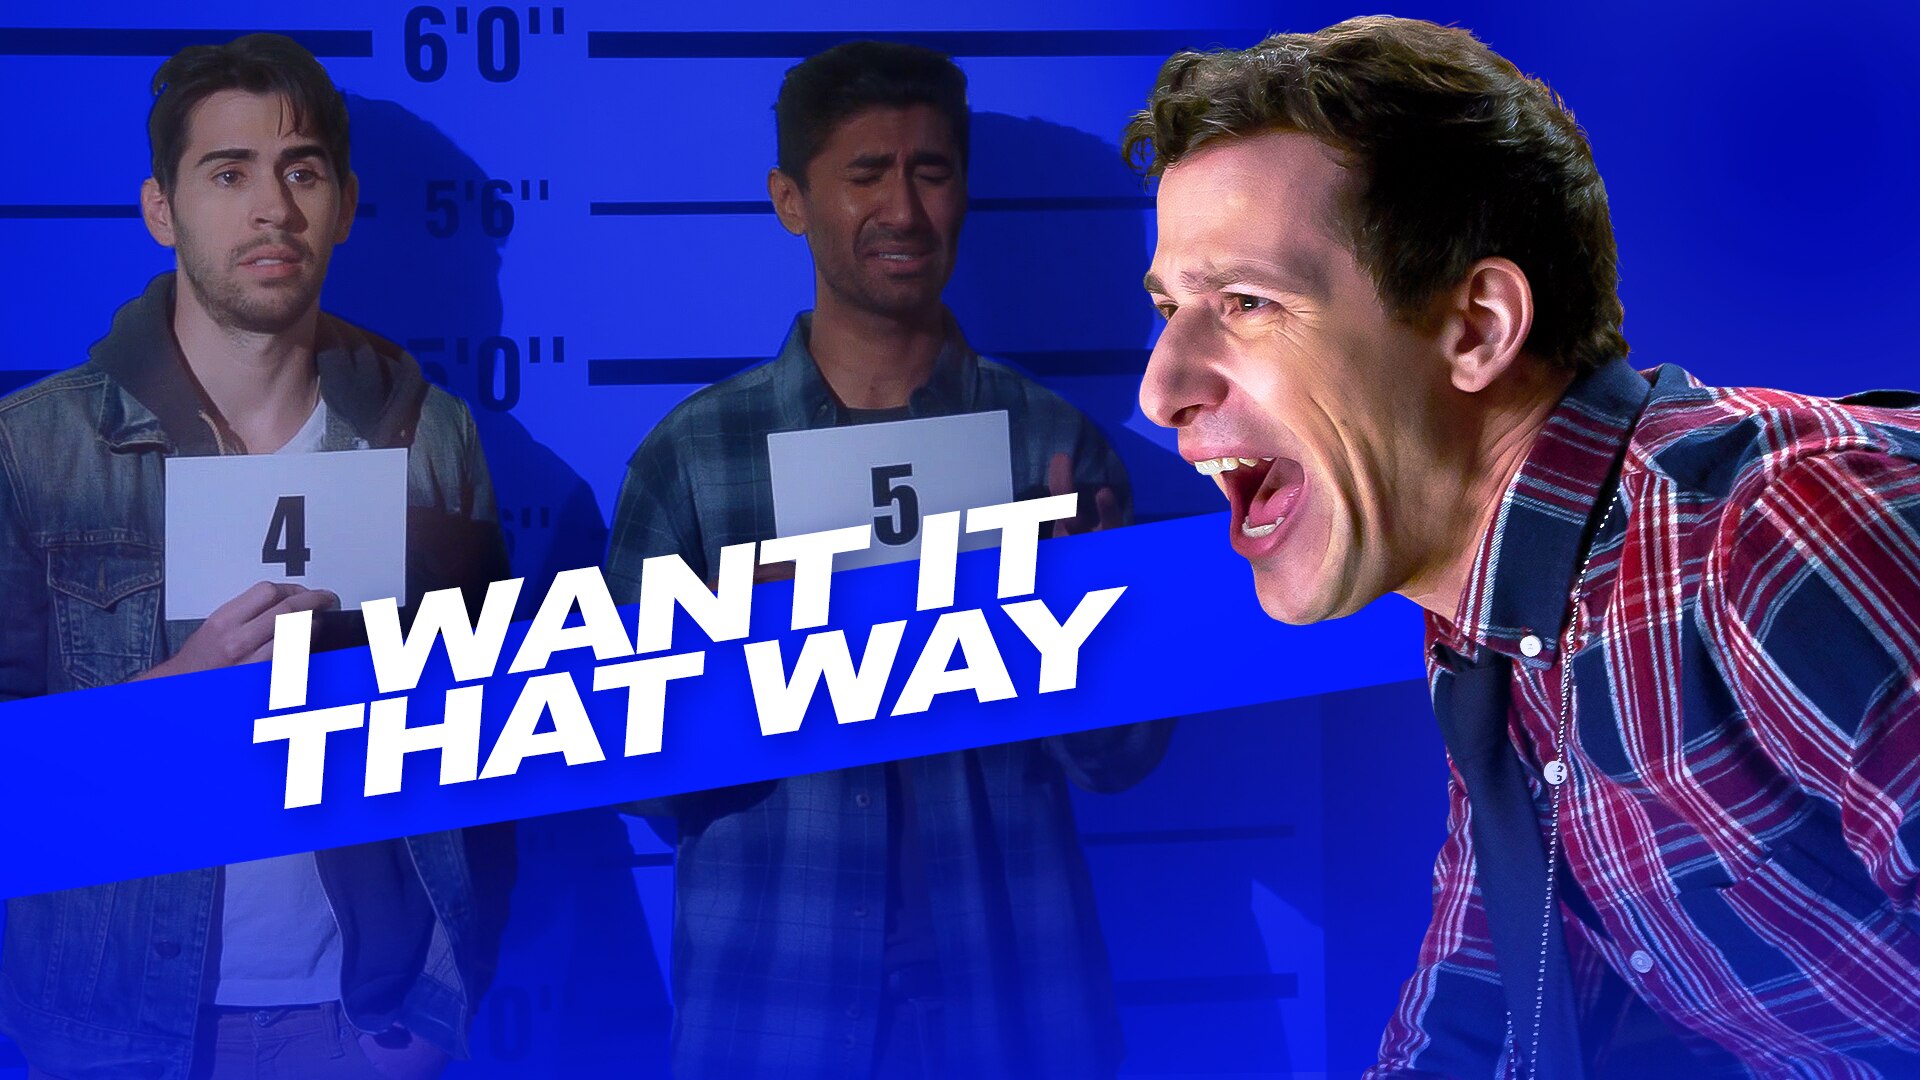 Watch Brooklyn Nine-Nine Web Exclusive: Cold Open: "I Want It That Way